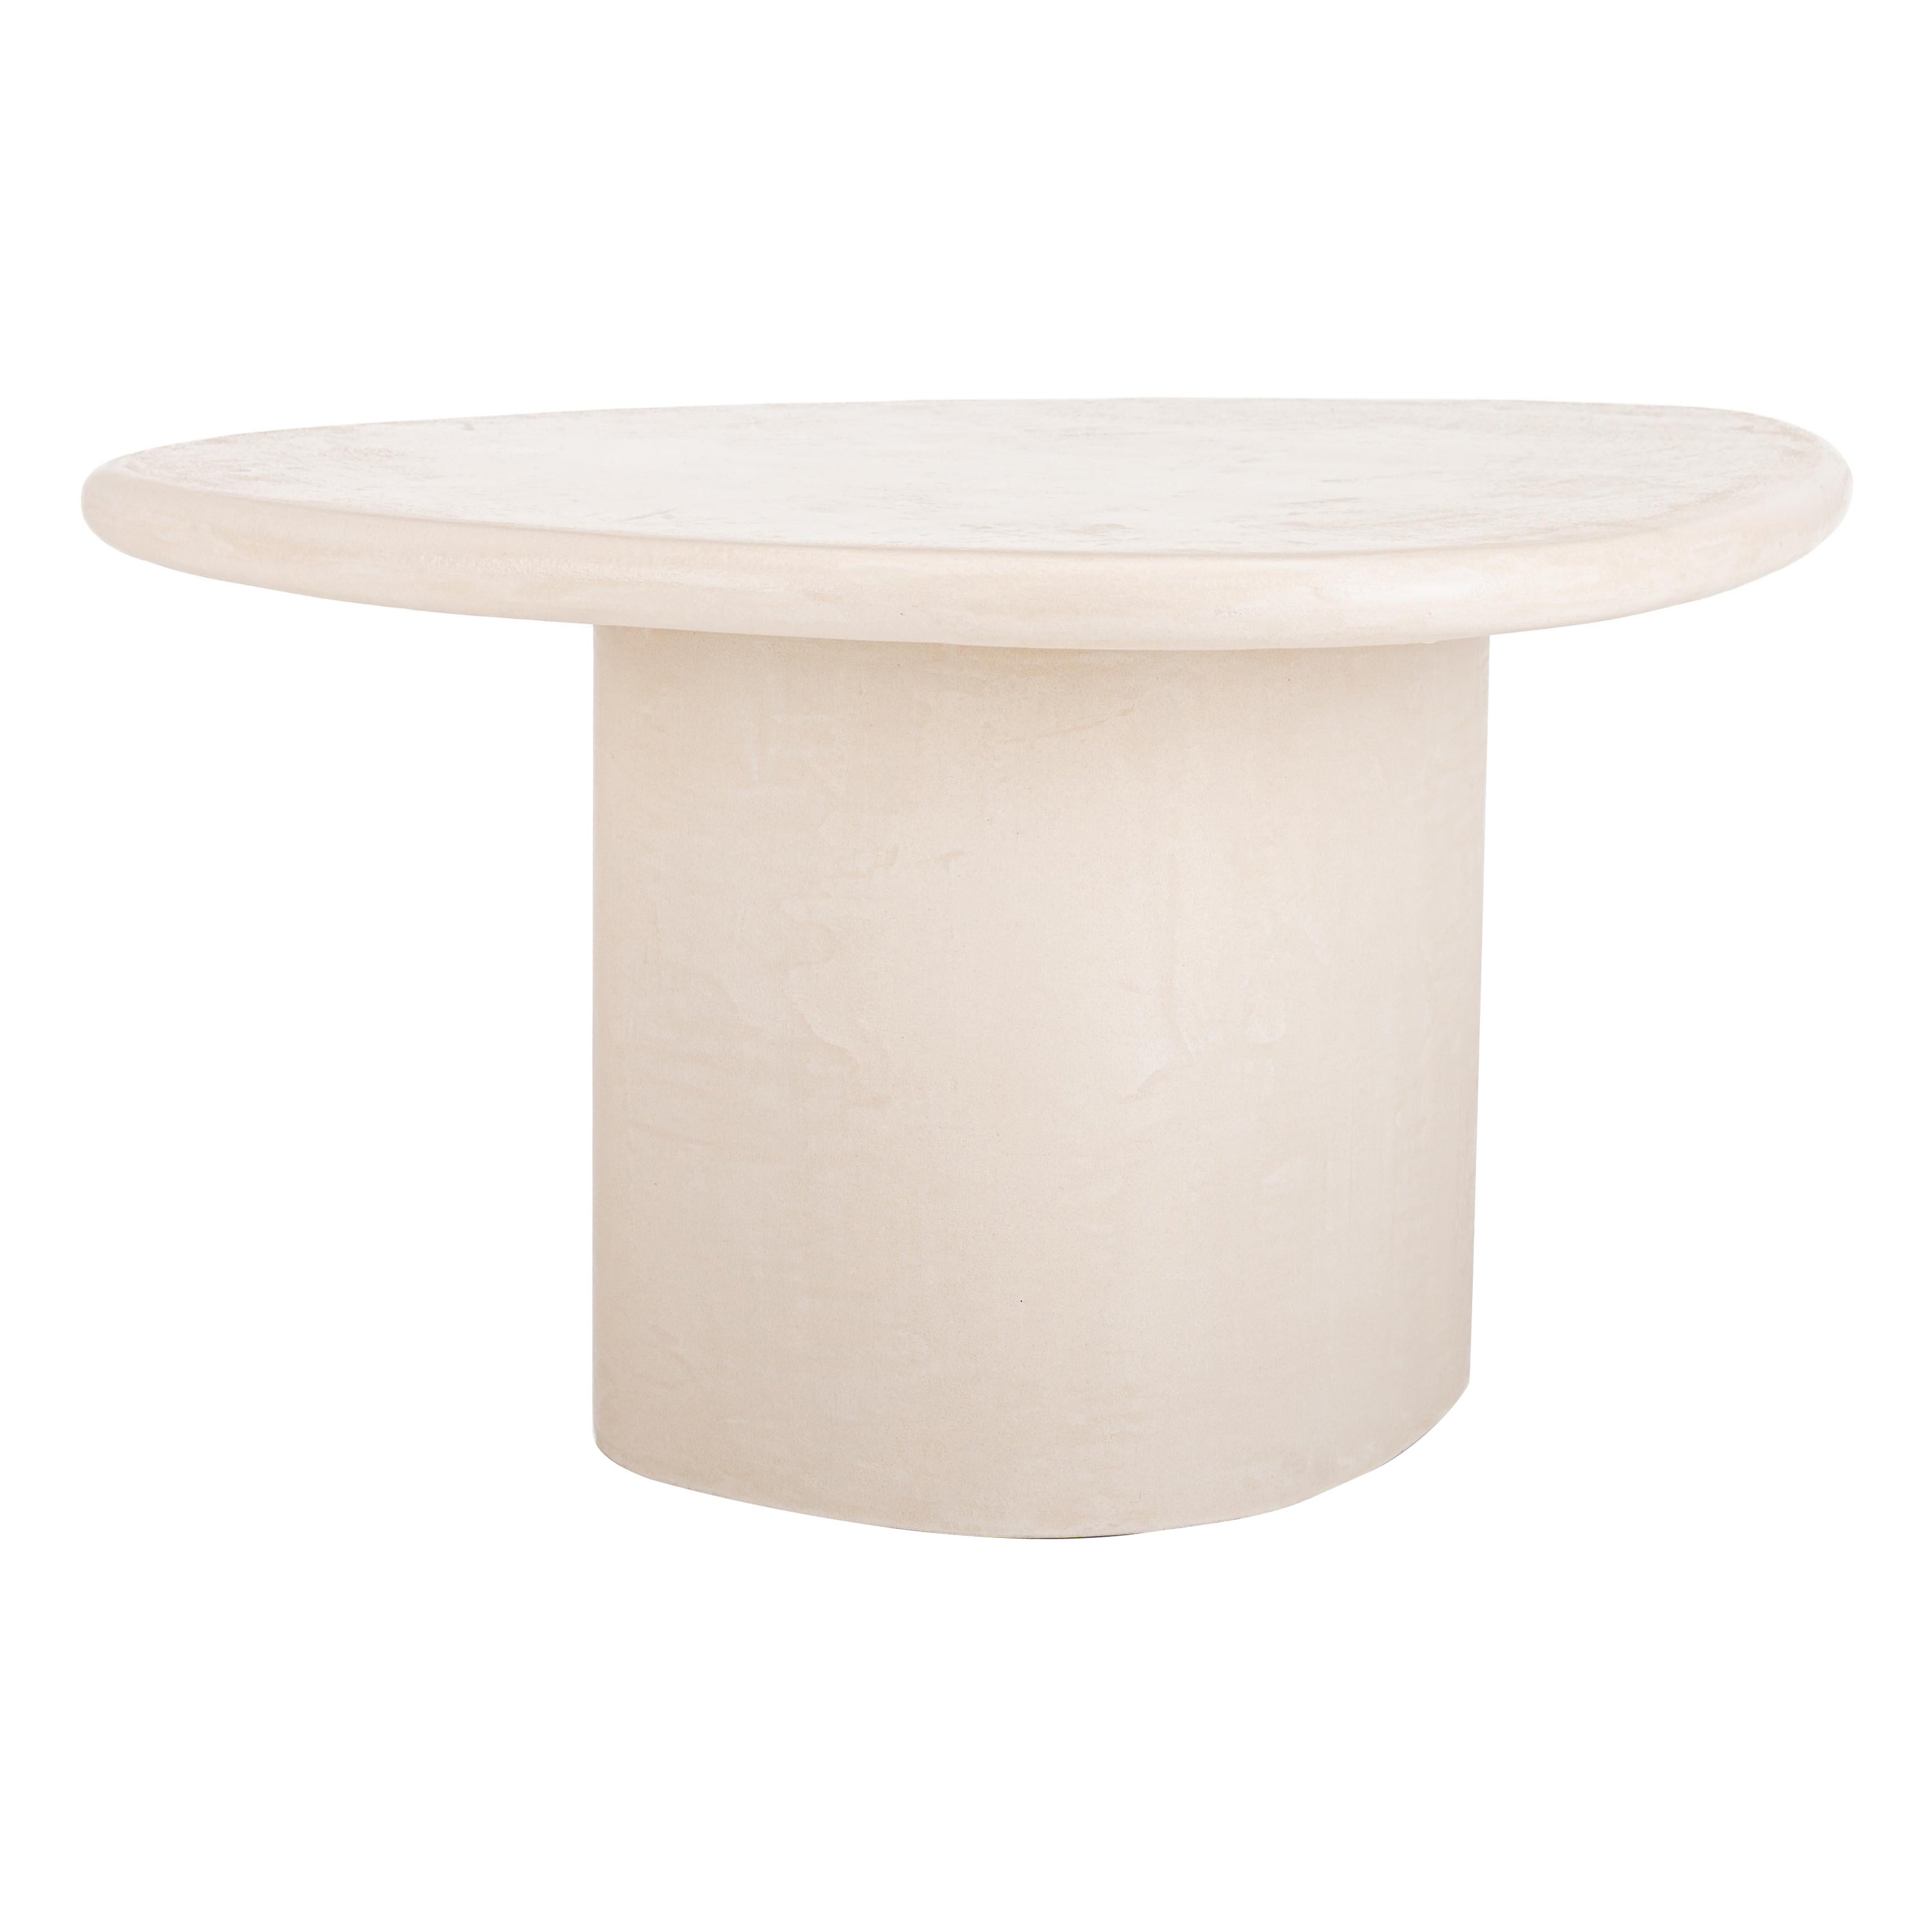 Contemporary Organic Natural Plaster Coffee Table "Primi" by Isabelle Beaumont For Sale